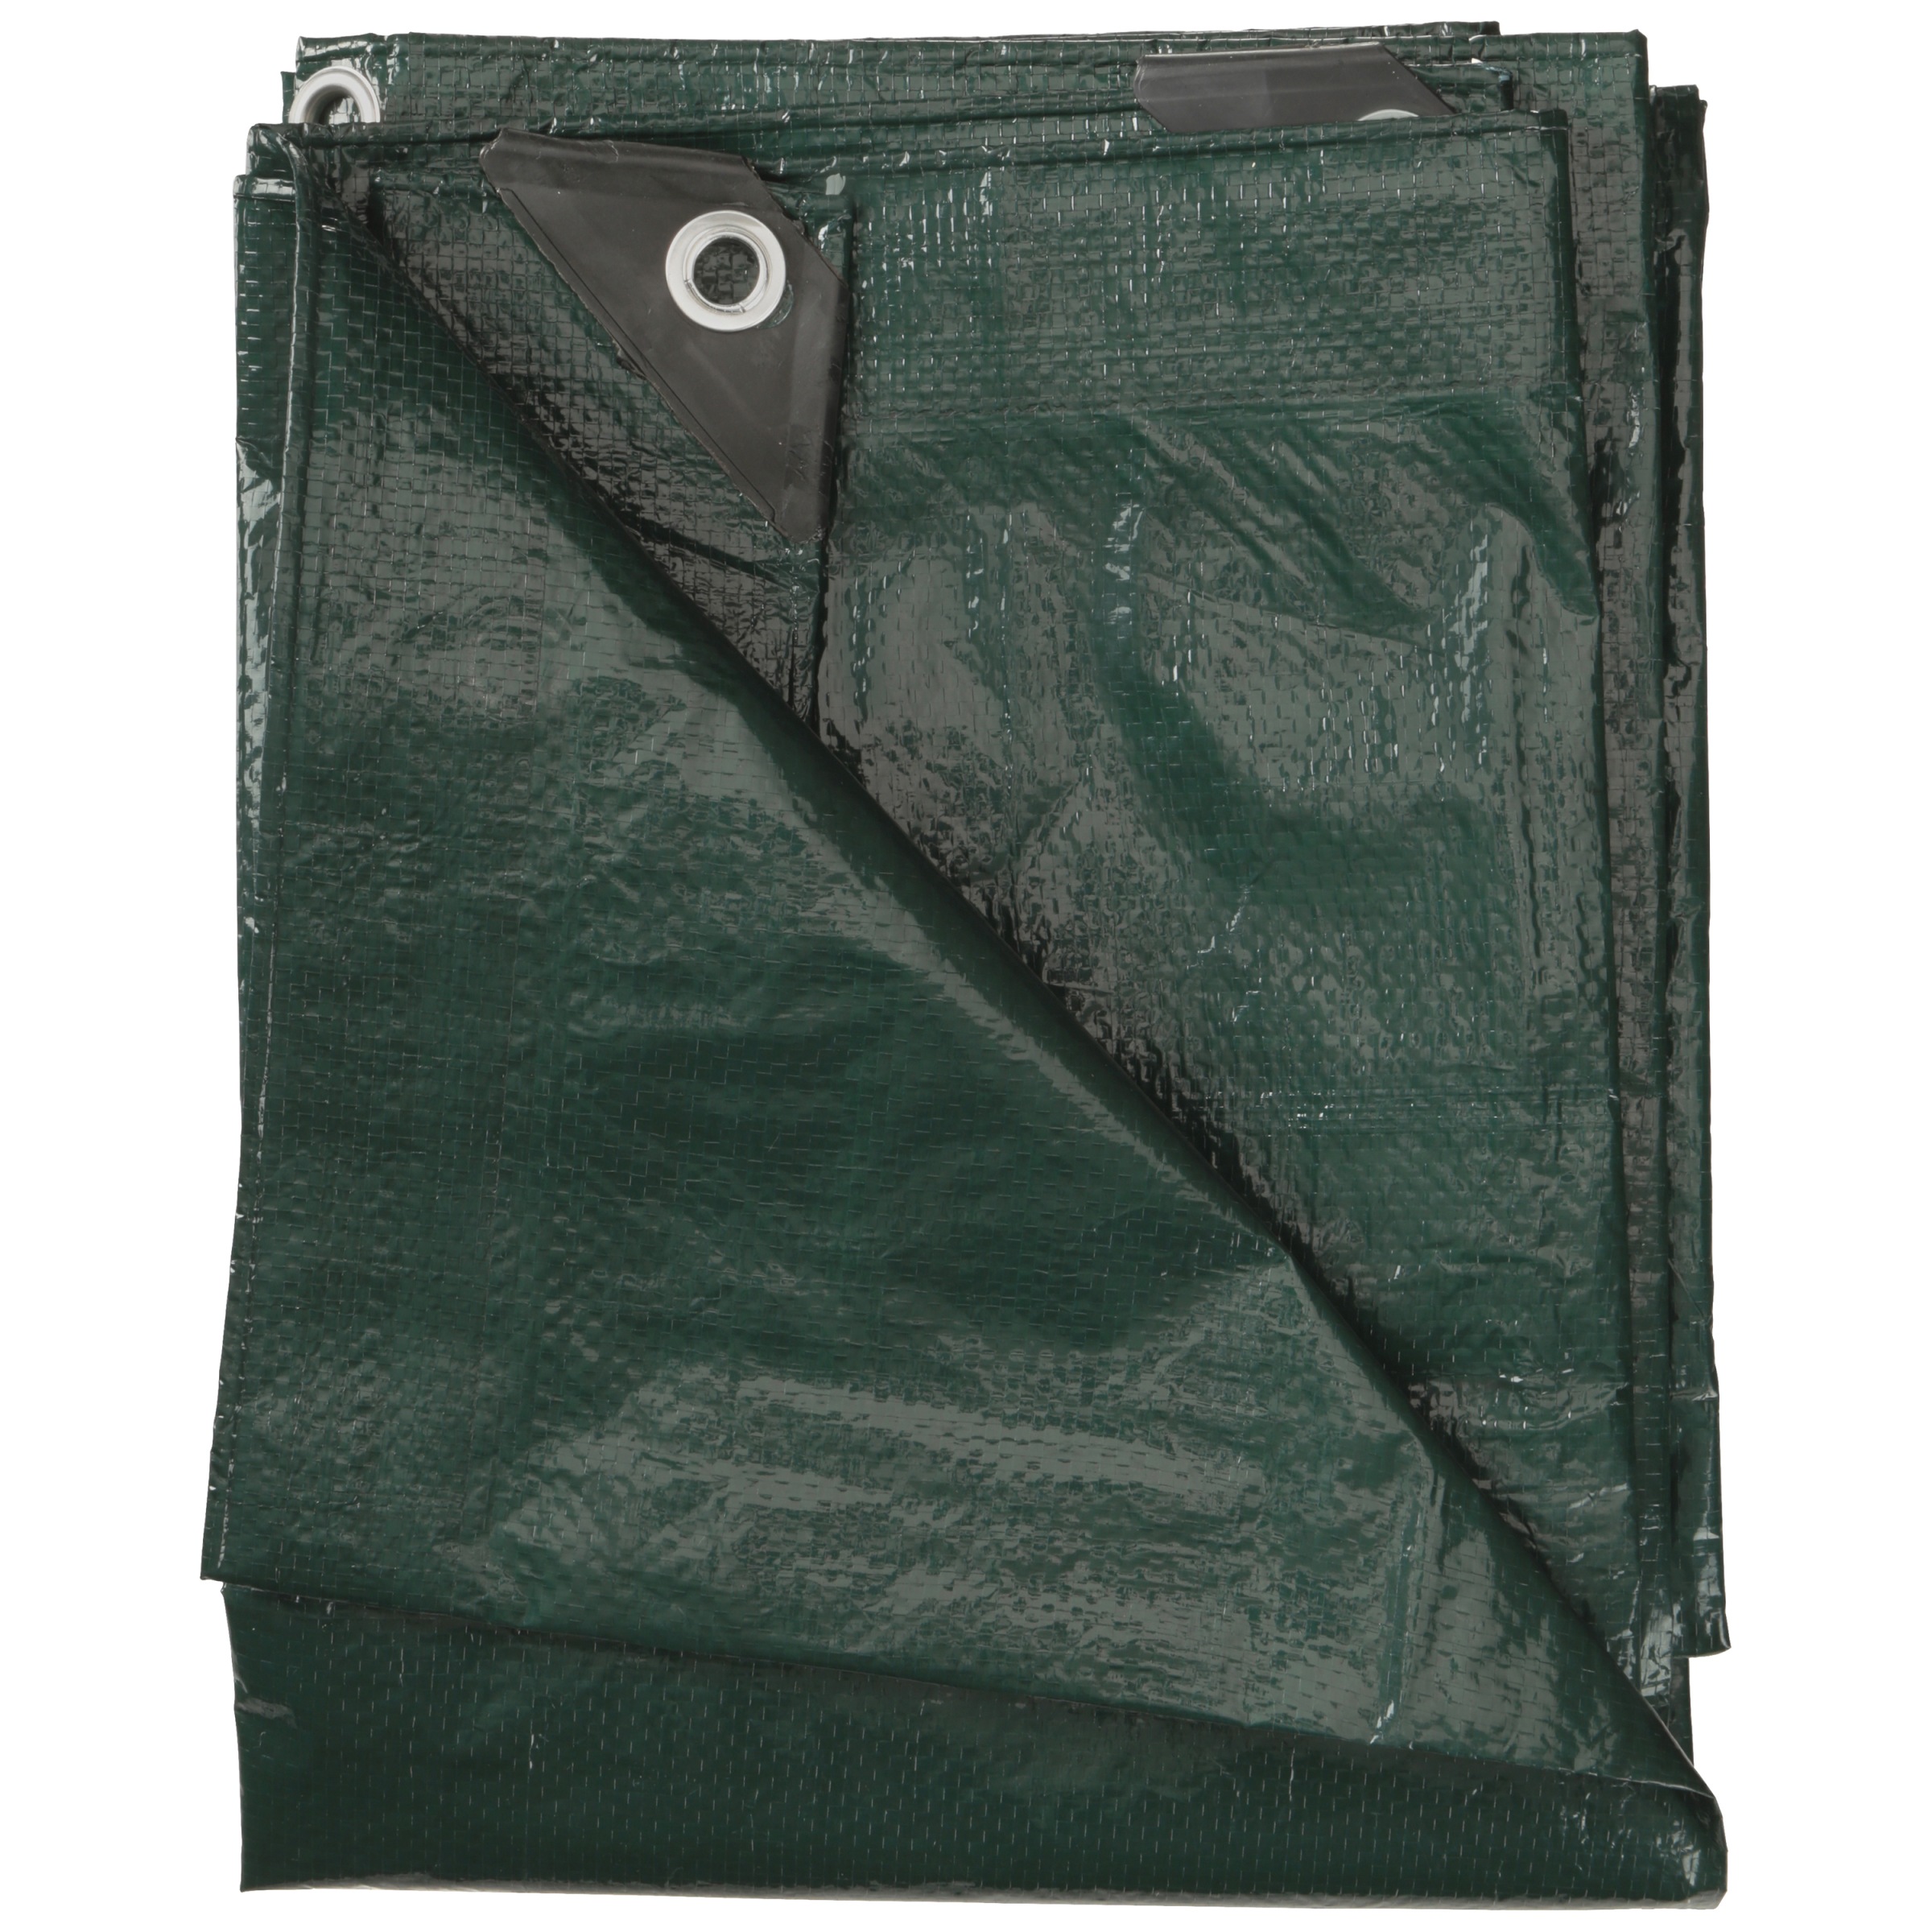 Stansport Rip Stop Tarp - 5' x 7' - Green - PDQ - image 3 of 4